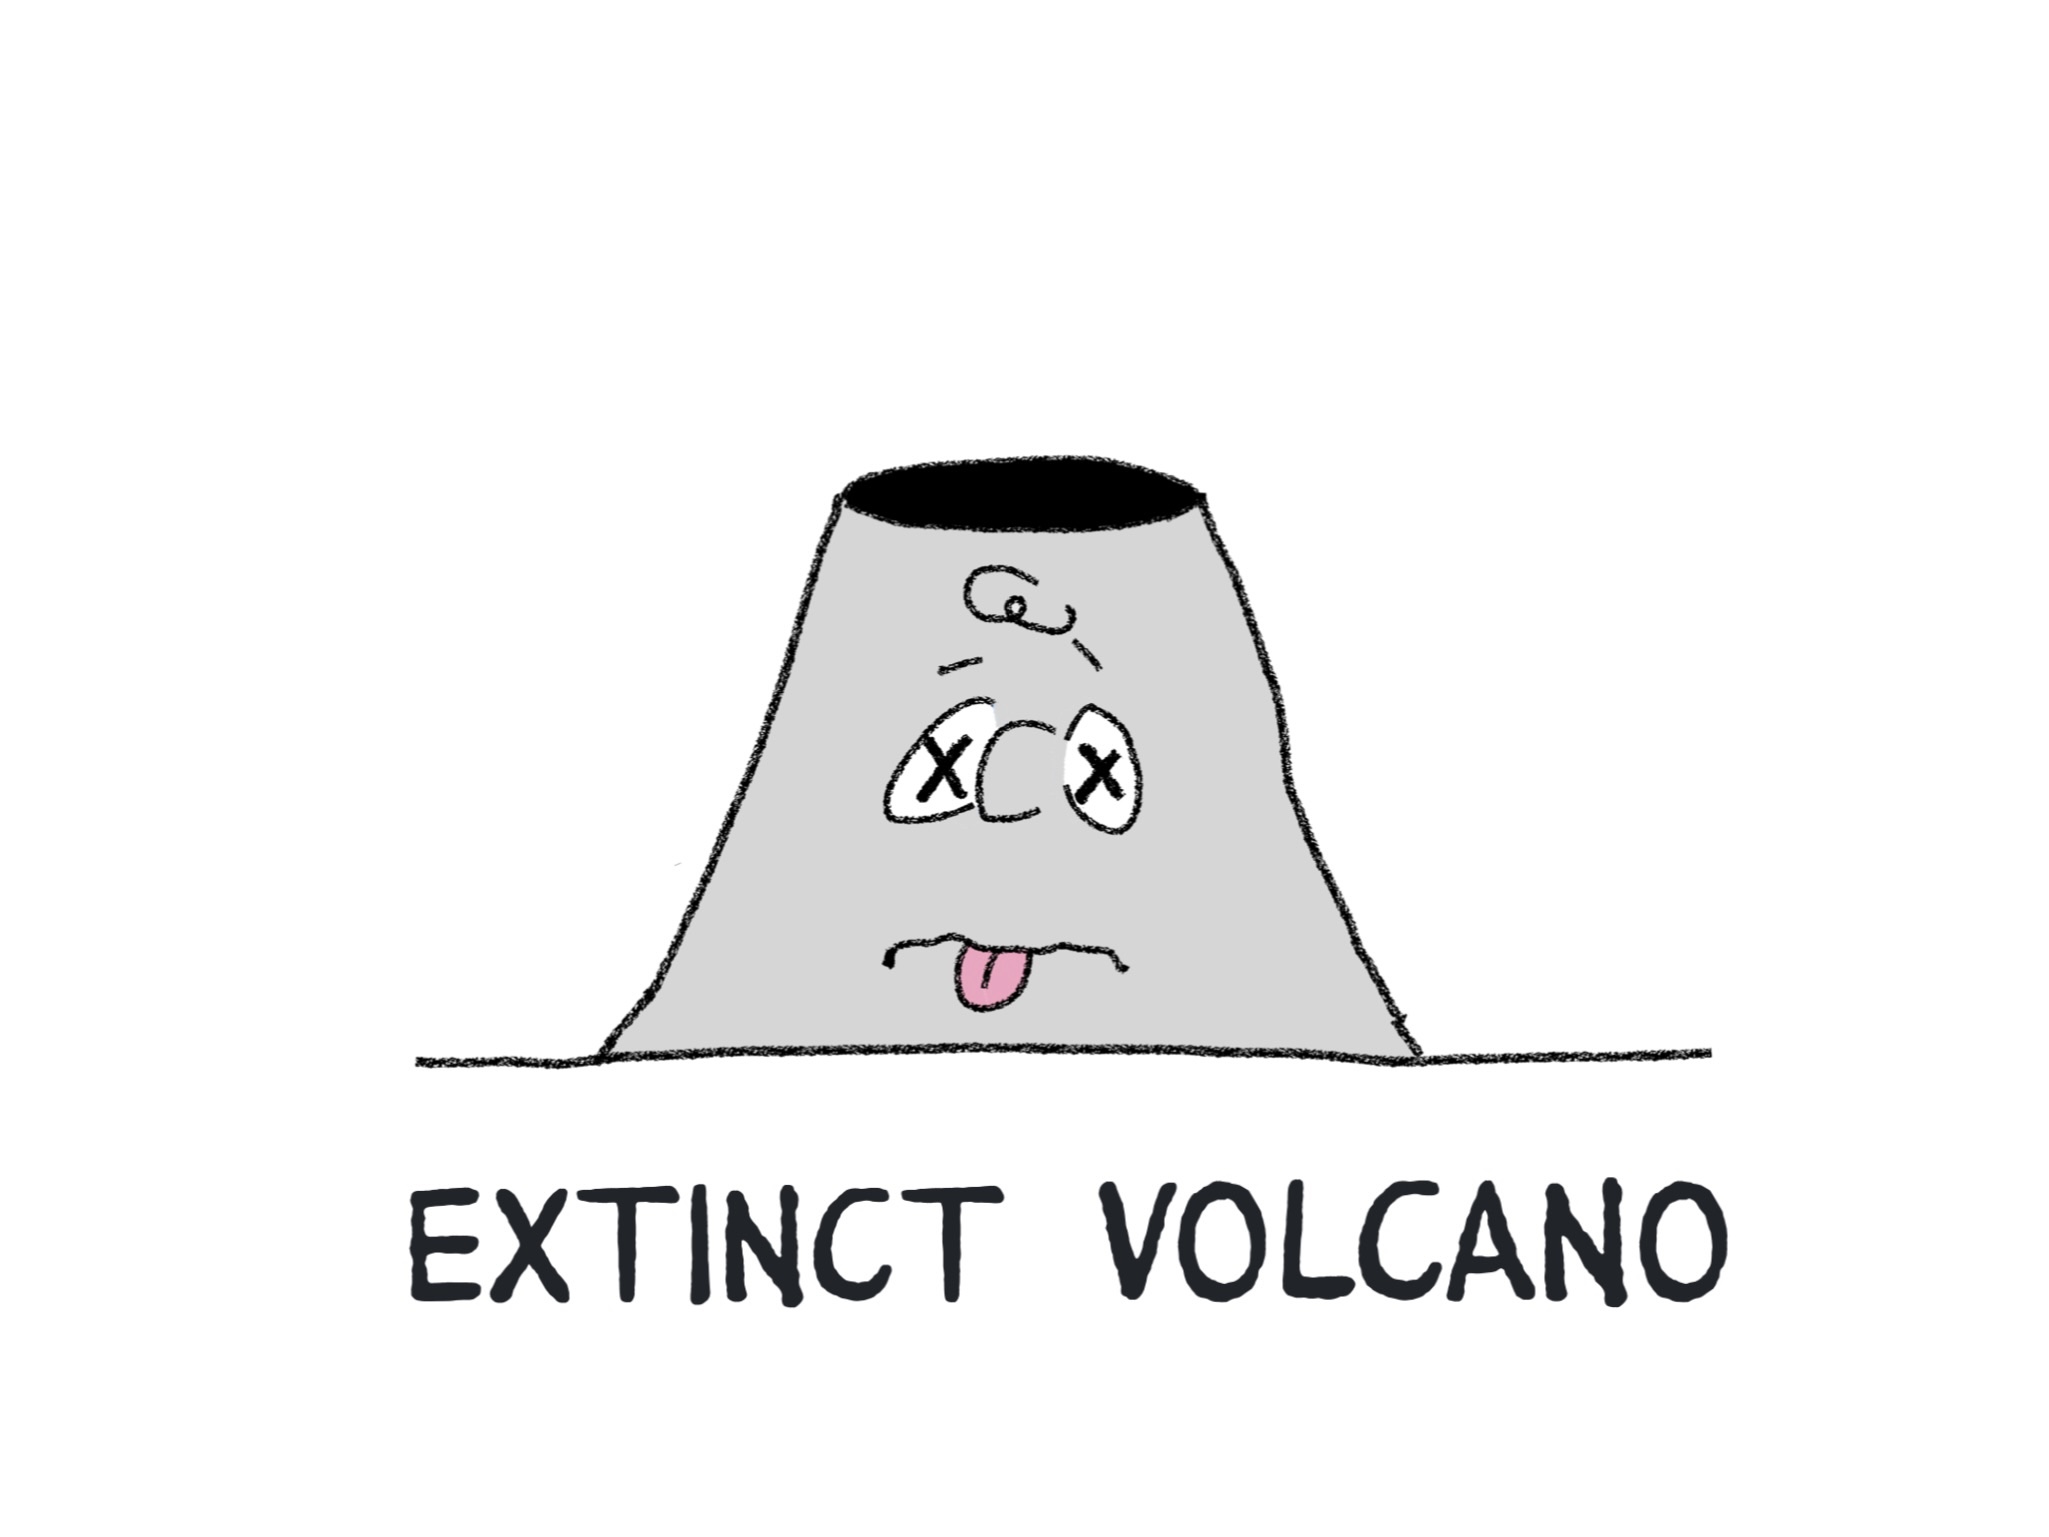 A cartoon extinct volcano, drawn in the style of the Peanuts TV show with Apple Pencil on iPad.